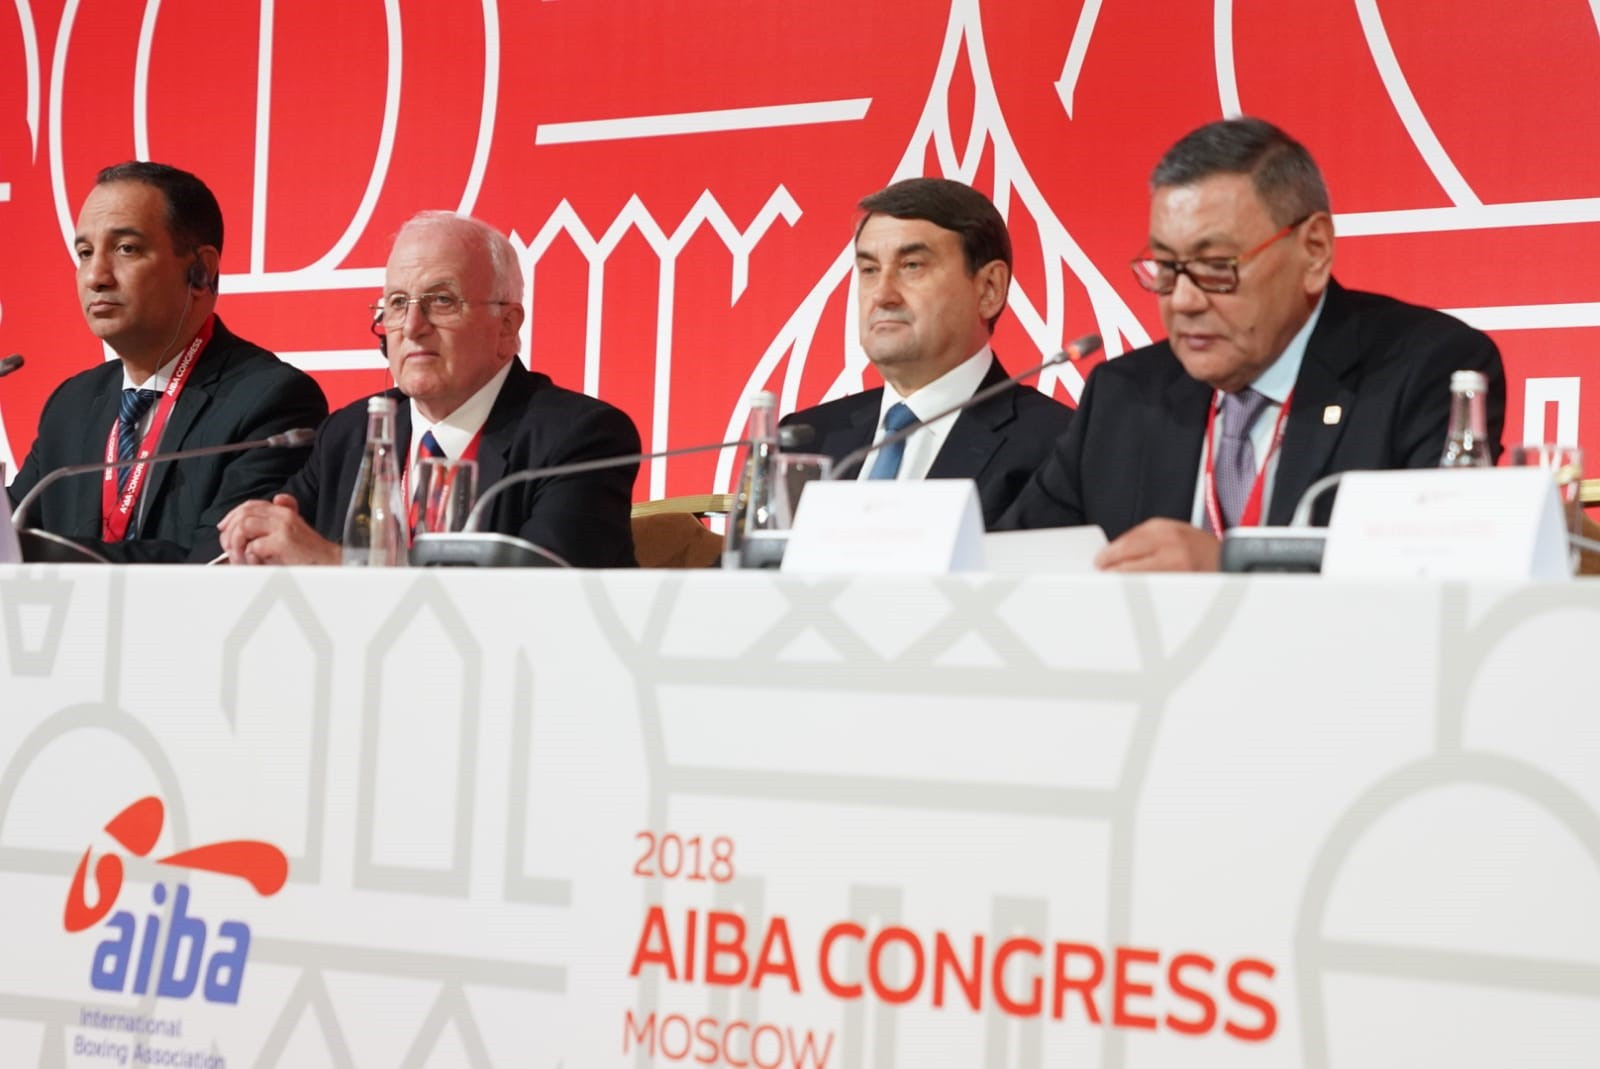 Chinese businessman who accused AIBA of "mismanagement" appointed by Rakhimov to Executive Committee